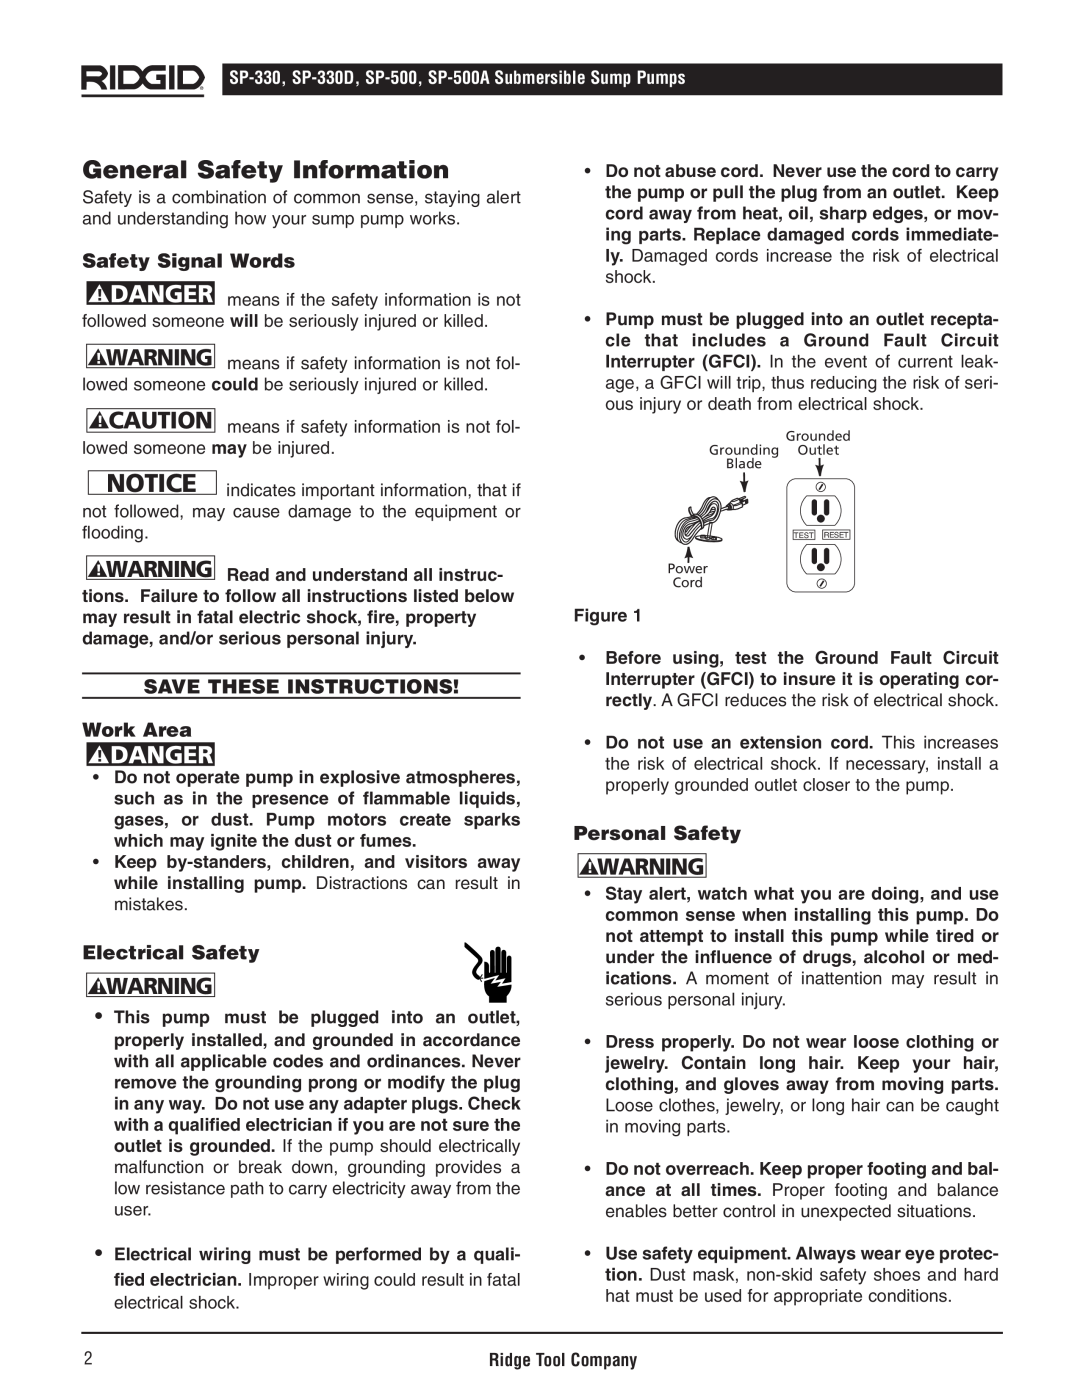 RIDGID SP500A General Safety Information, Danger, Safety Signal Words, SAVE THESE INSTRUCTIONS Work Area, Personal Safety 